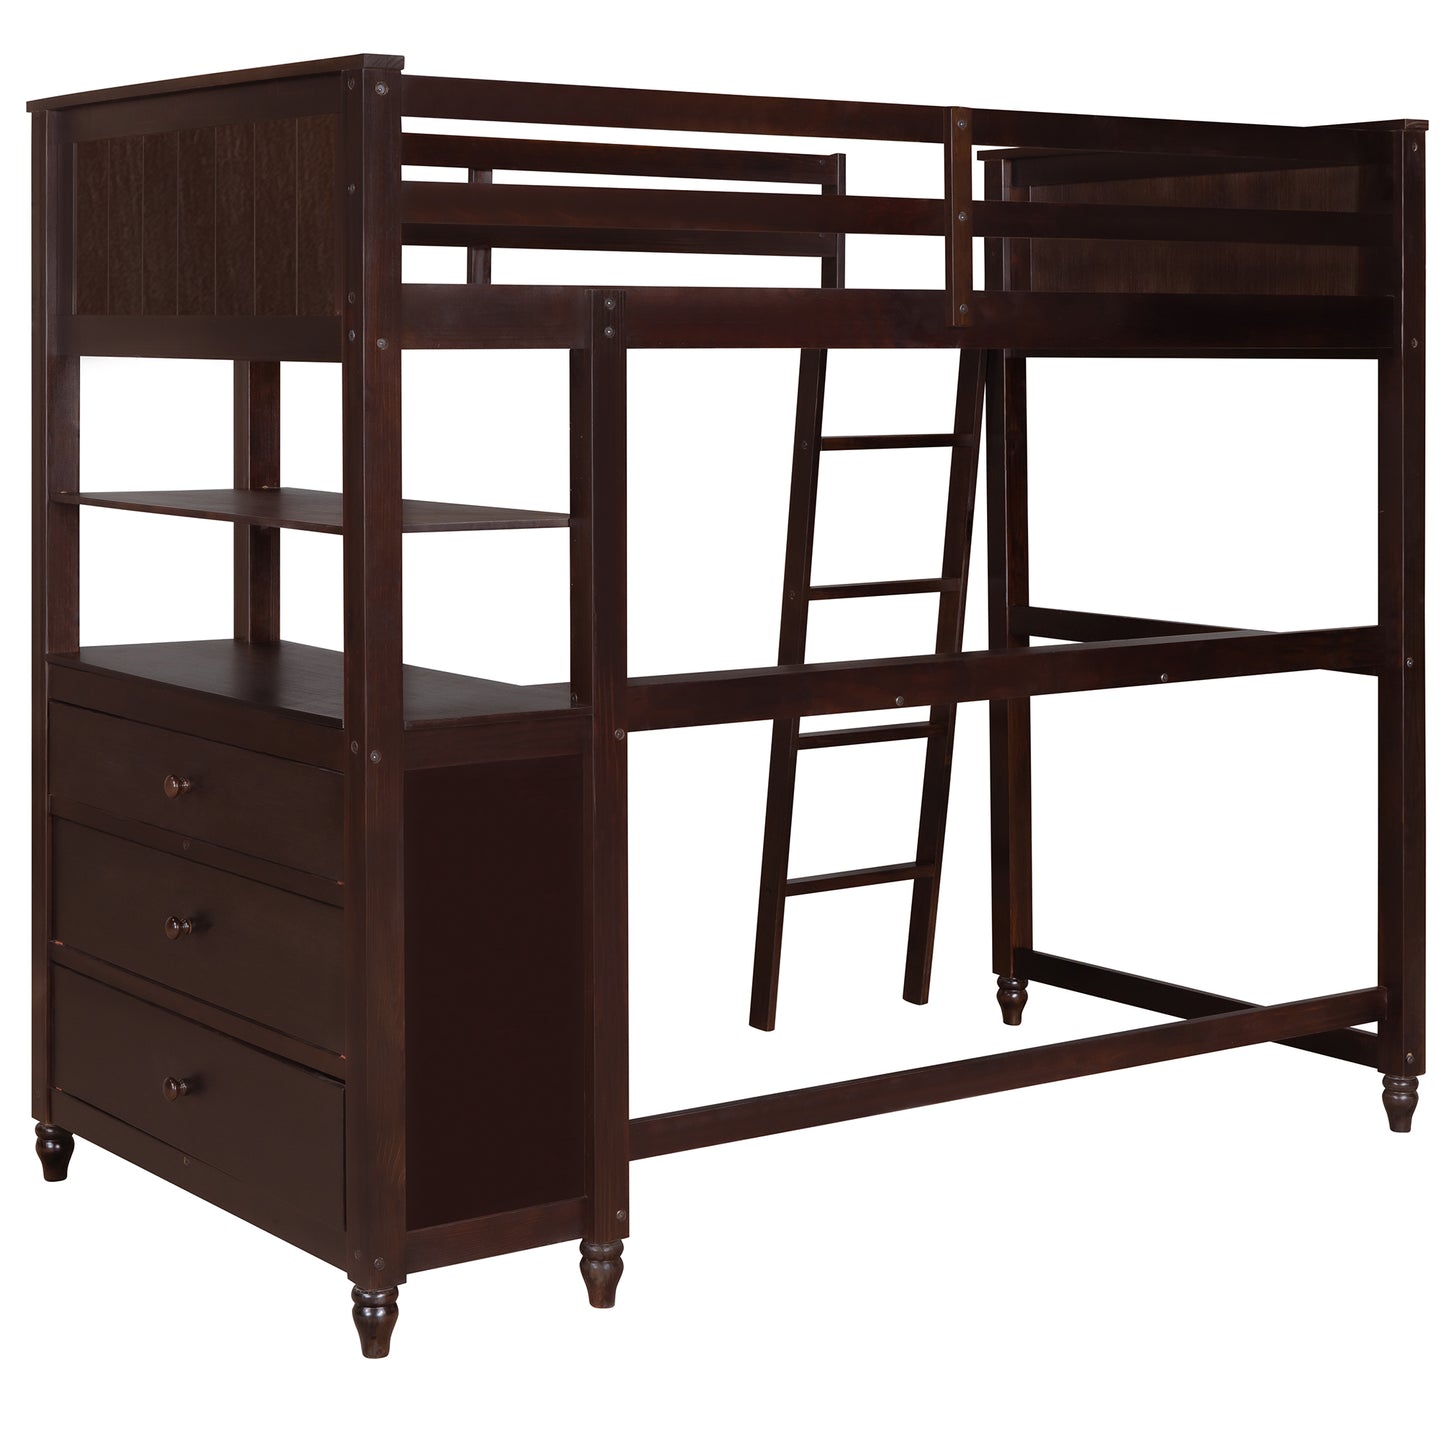 Twin size Loft Bed with Drawers and Desk, Wooden Loft Bed with Shelves - Espresso